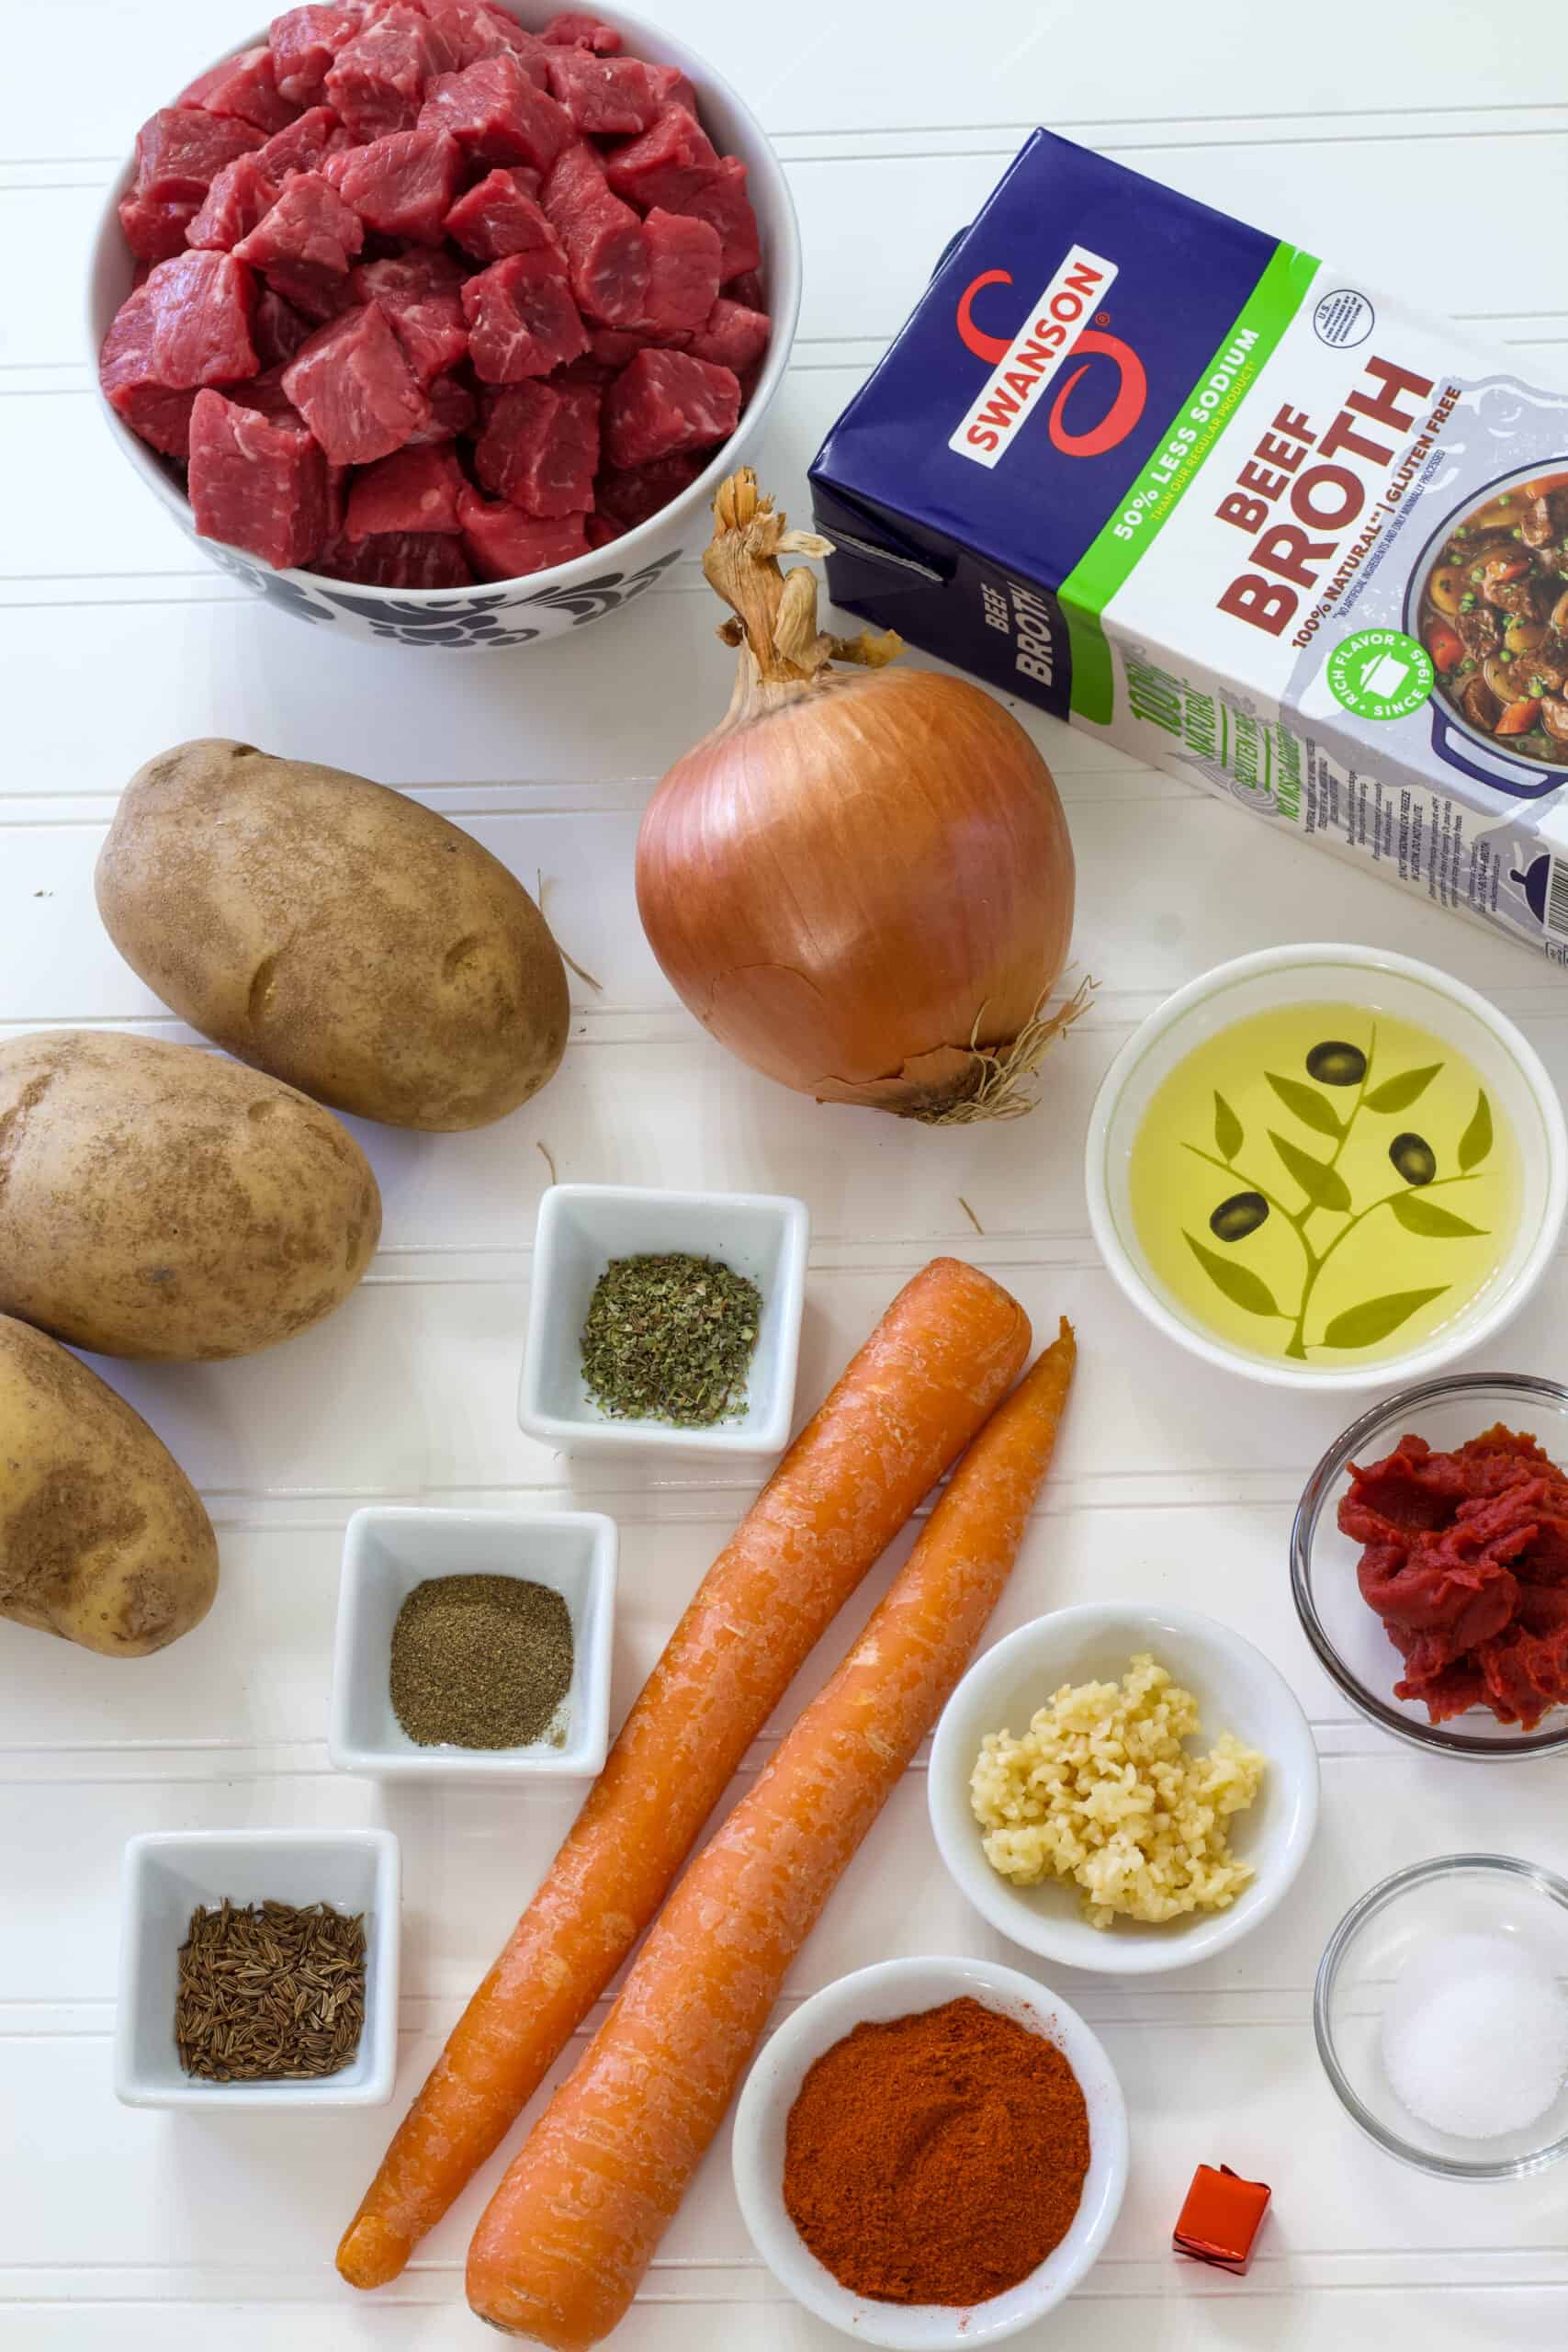 All of the ingredients needed to make authentic german goulash soup laying on a solid white background.